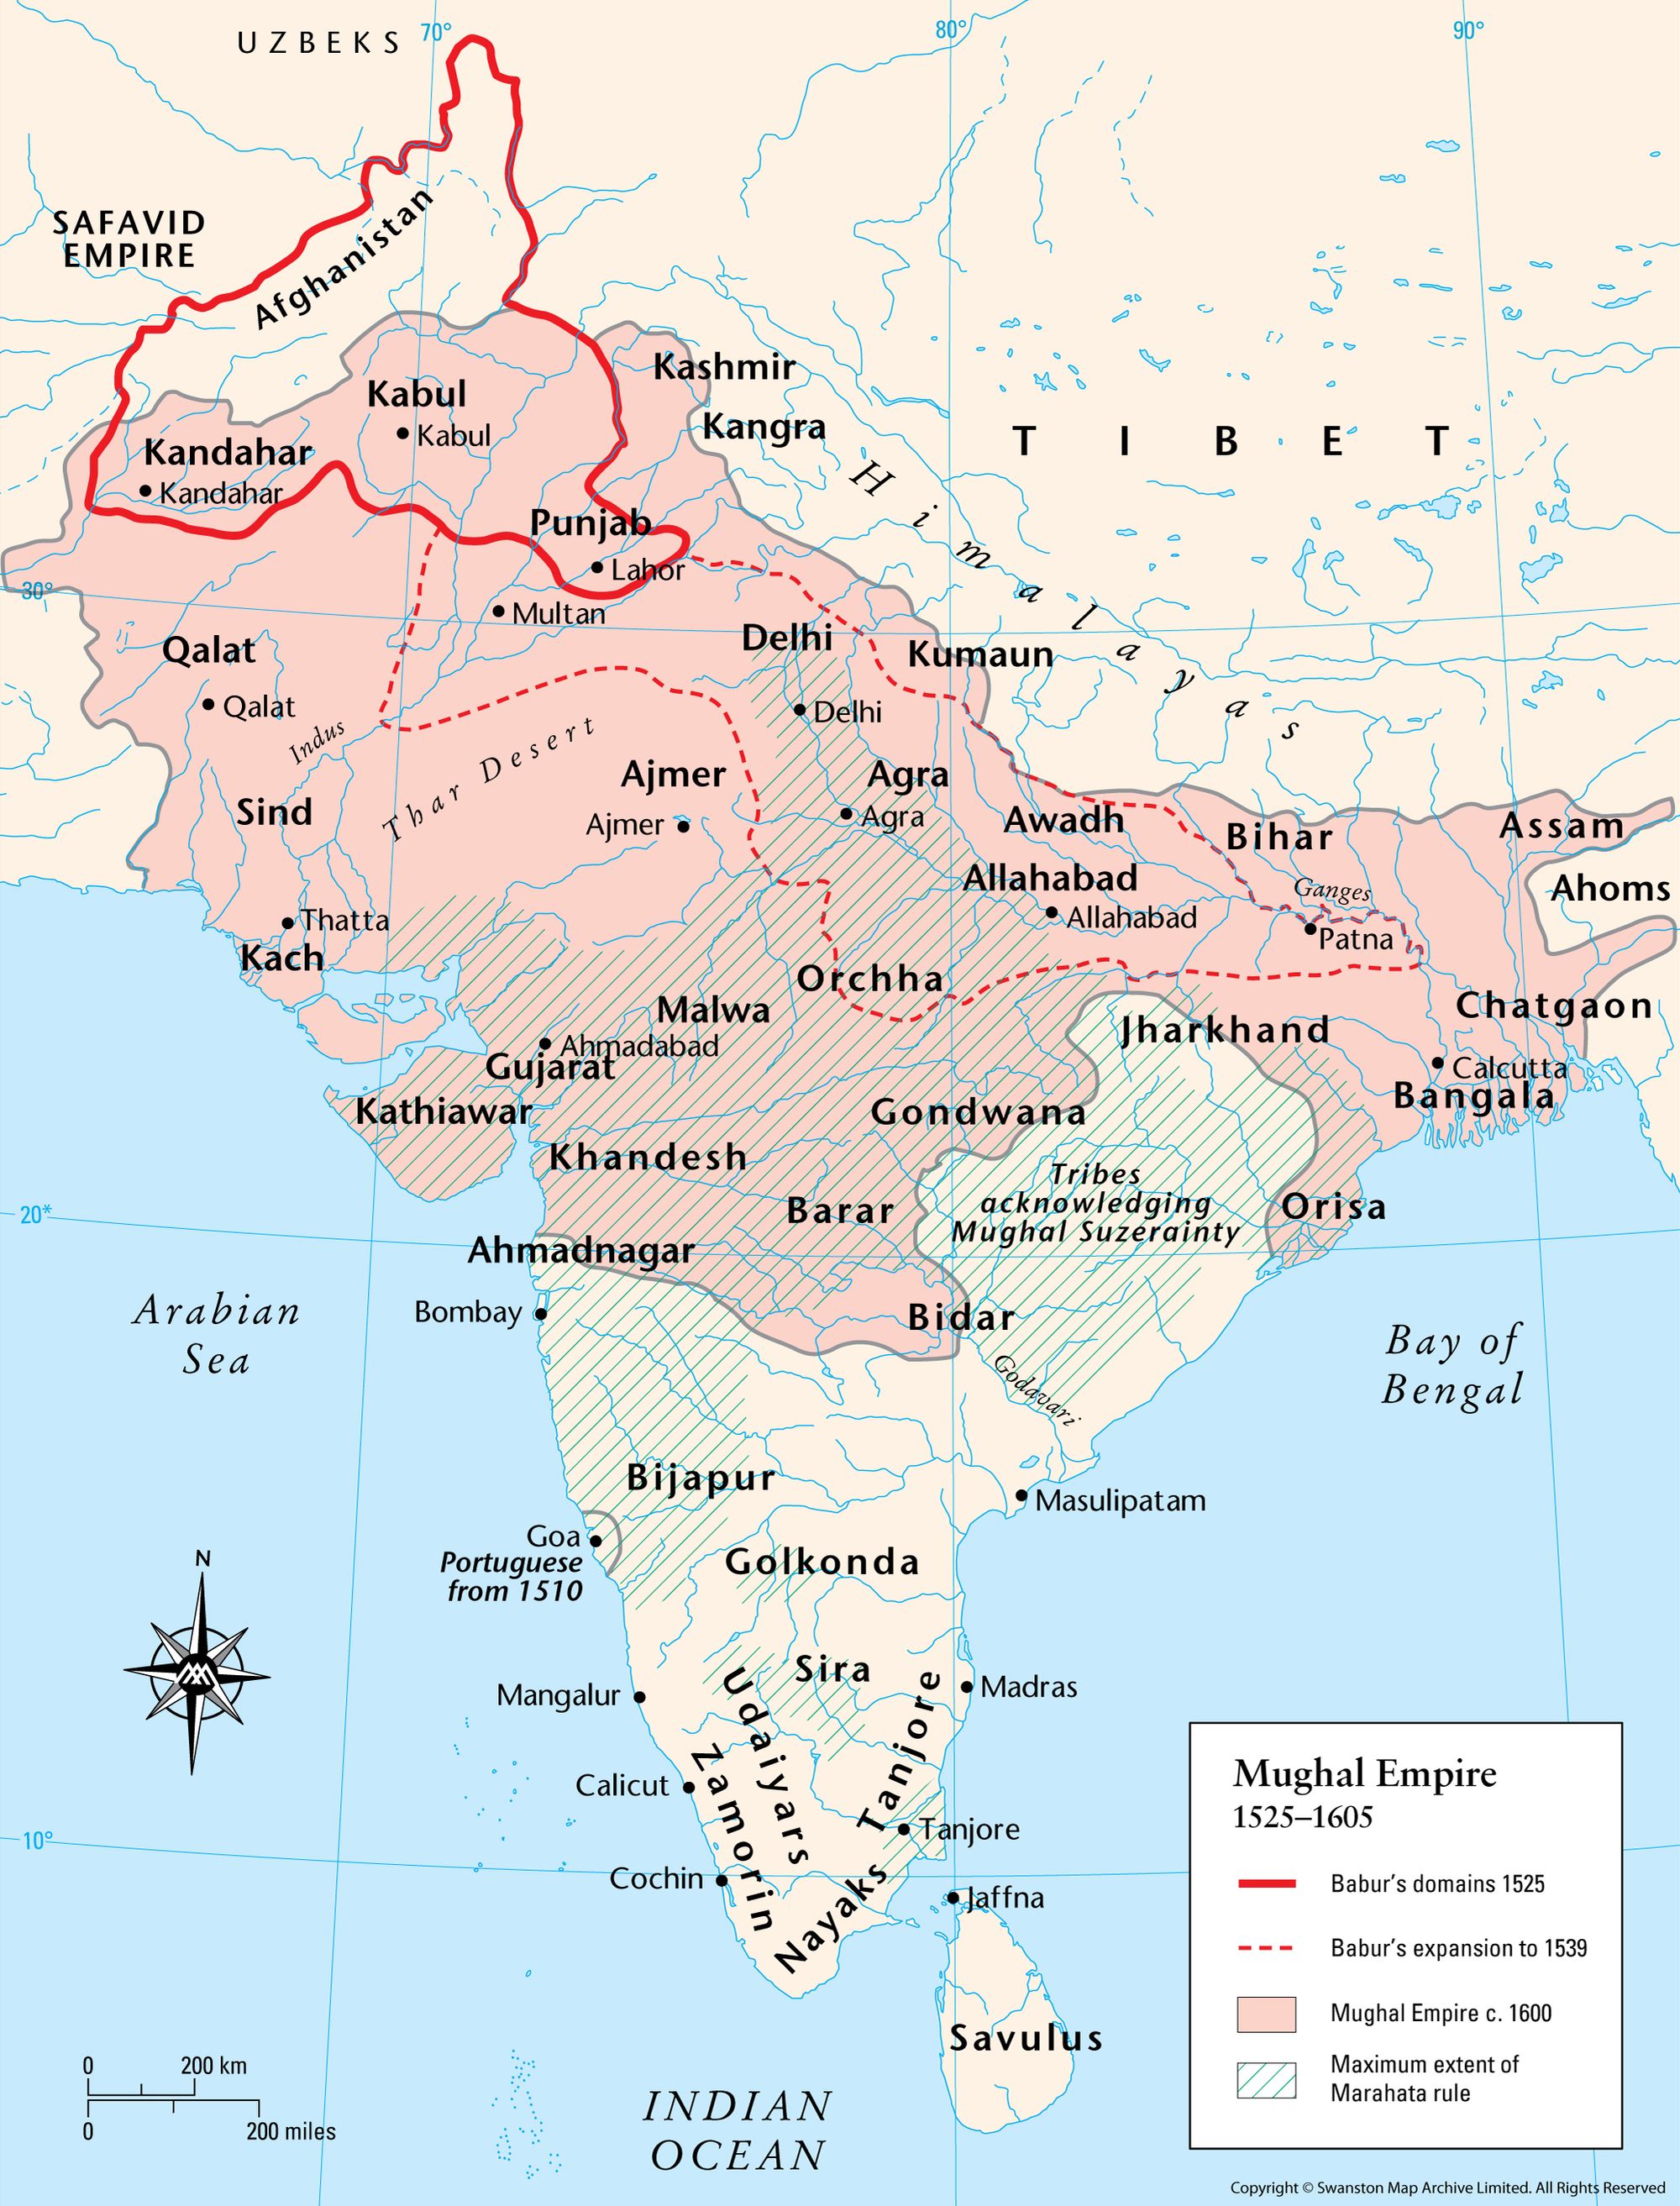 Mughal Empire at the death of Akbar in 1605. Source: The Map Archive https://www.themaparchive.com/product/mughal-empire-15251605/